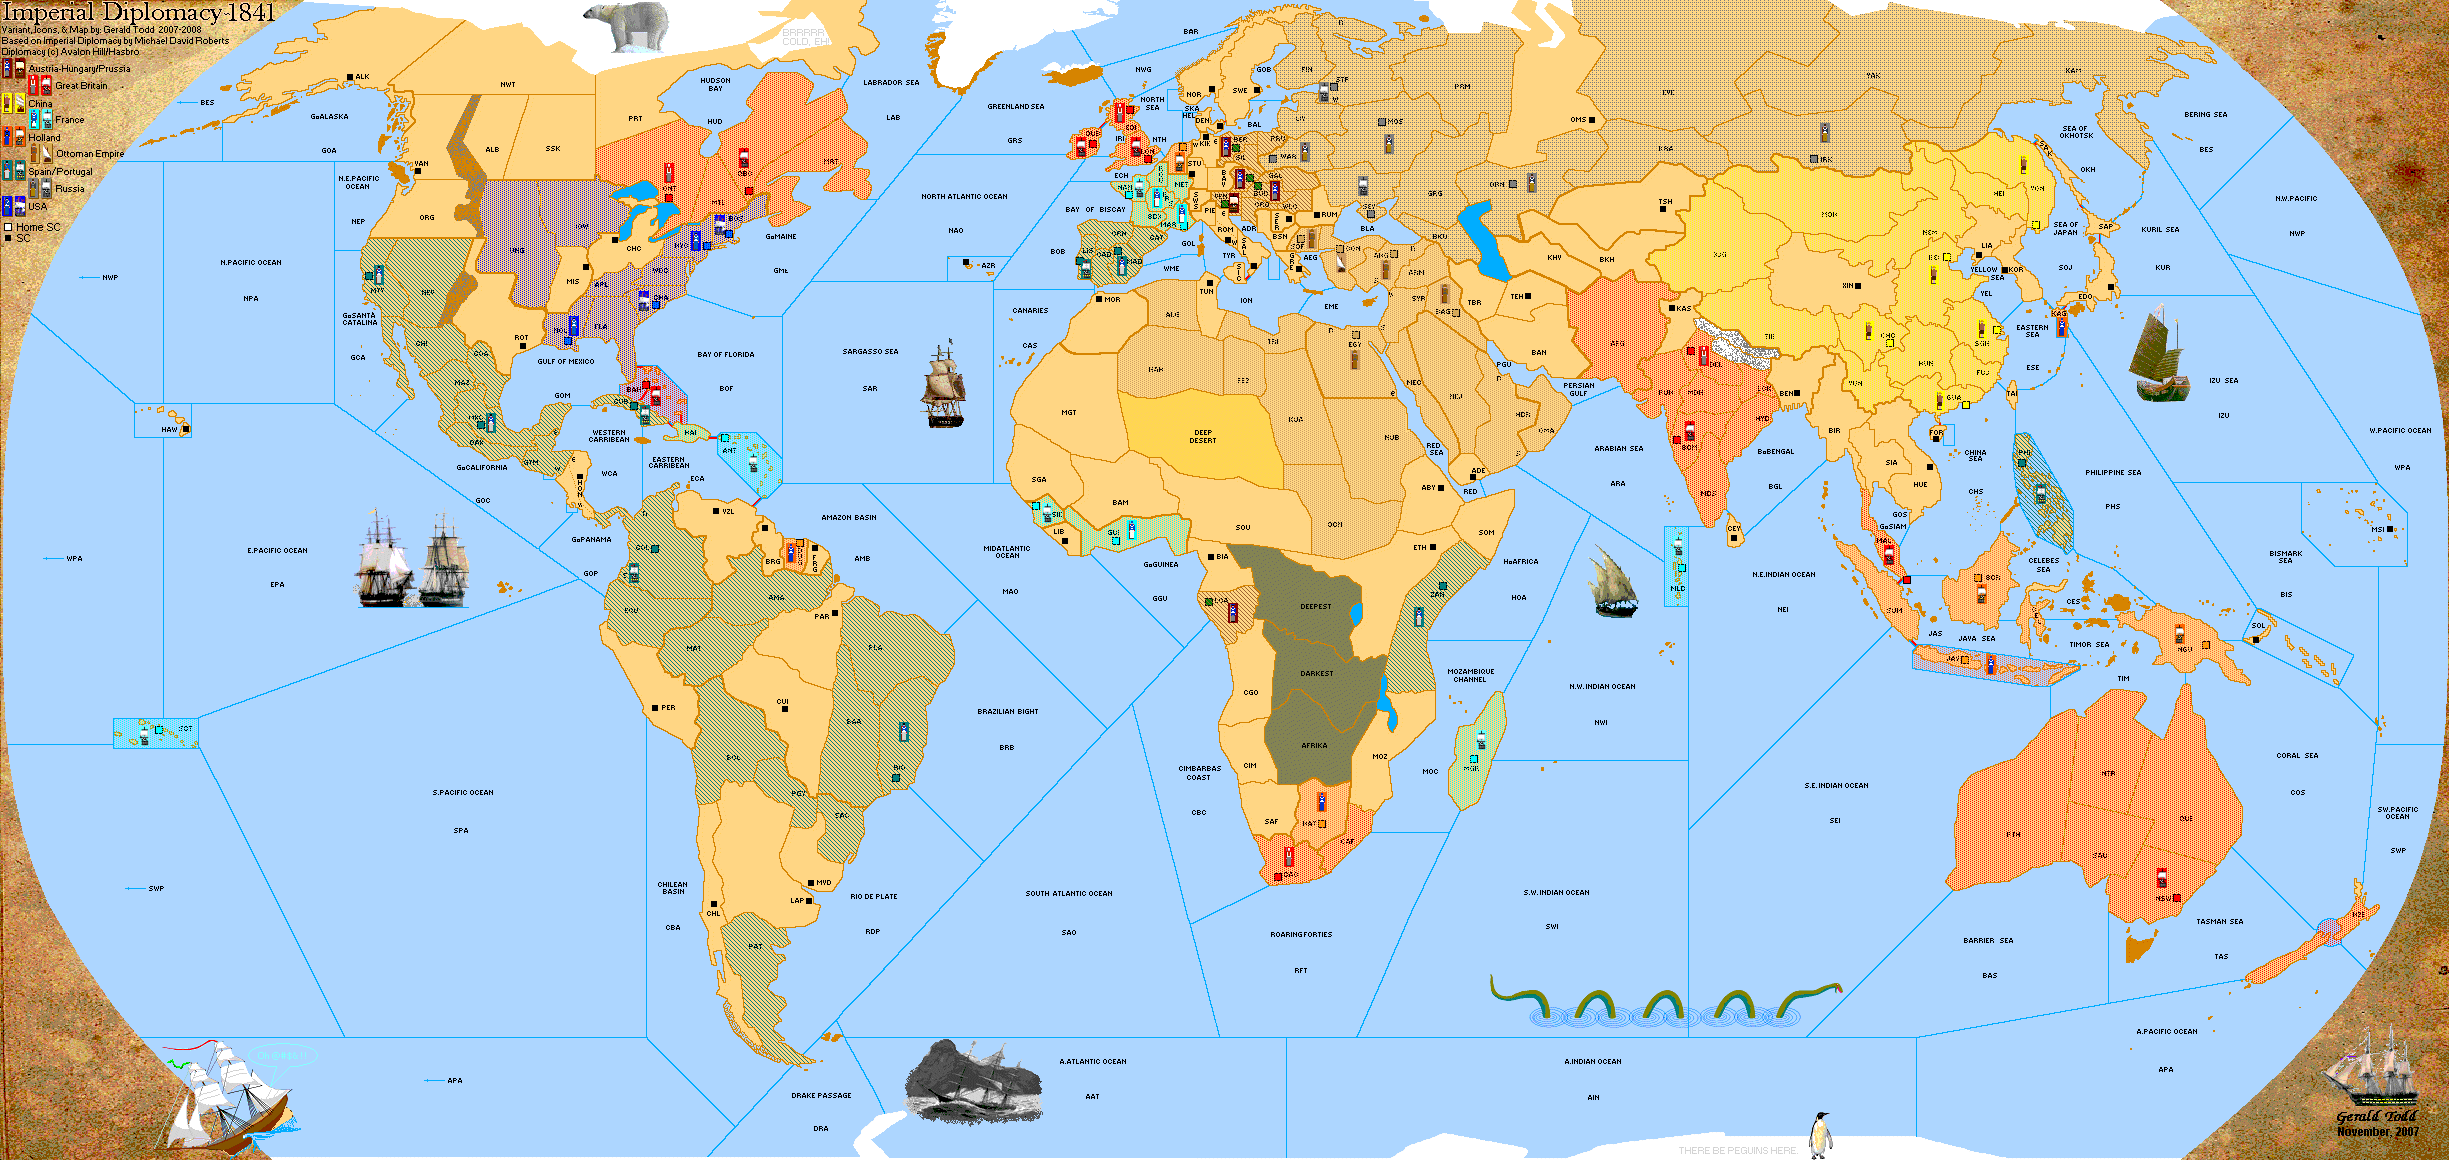 imperial diplomacy map